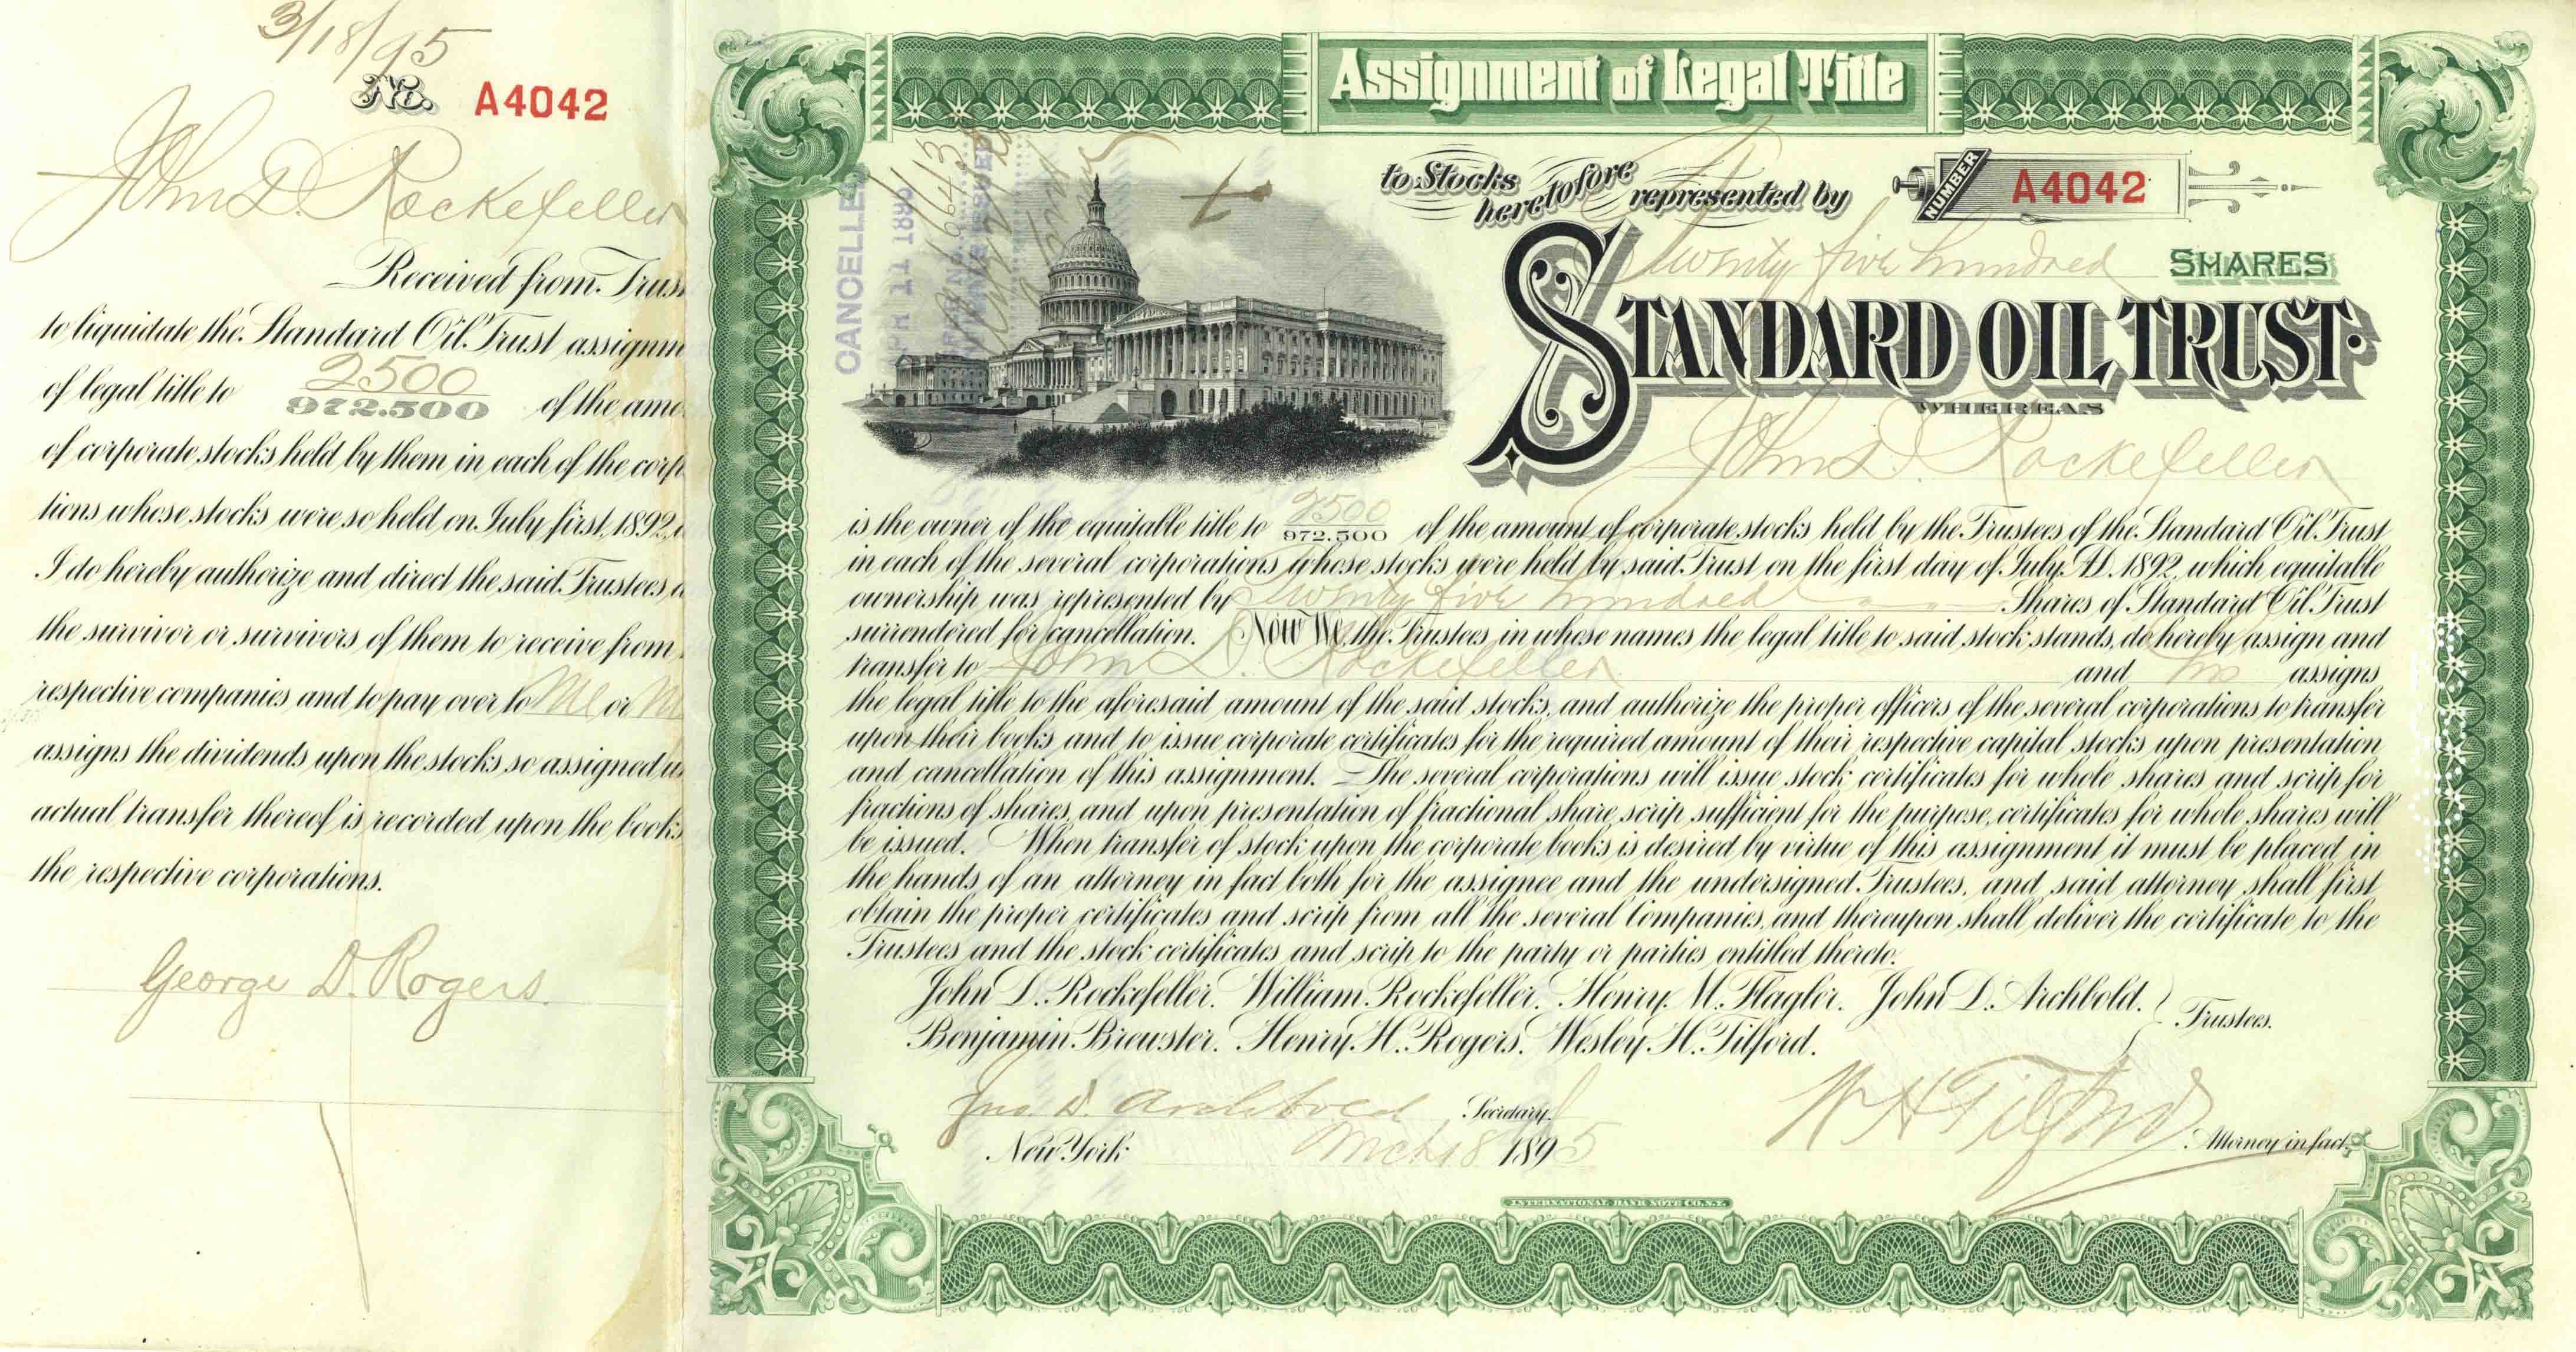 Standard Oil Trust Issued to and Signed by J.D. Rockefeller - Stock Certificate - Also signed by Archbold, Tilford and Rogers